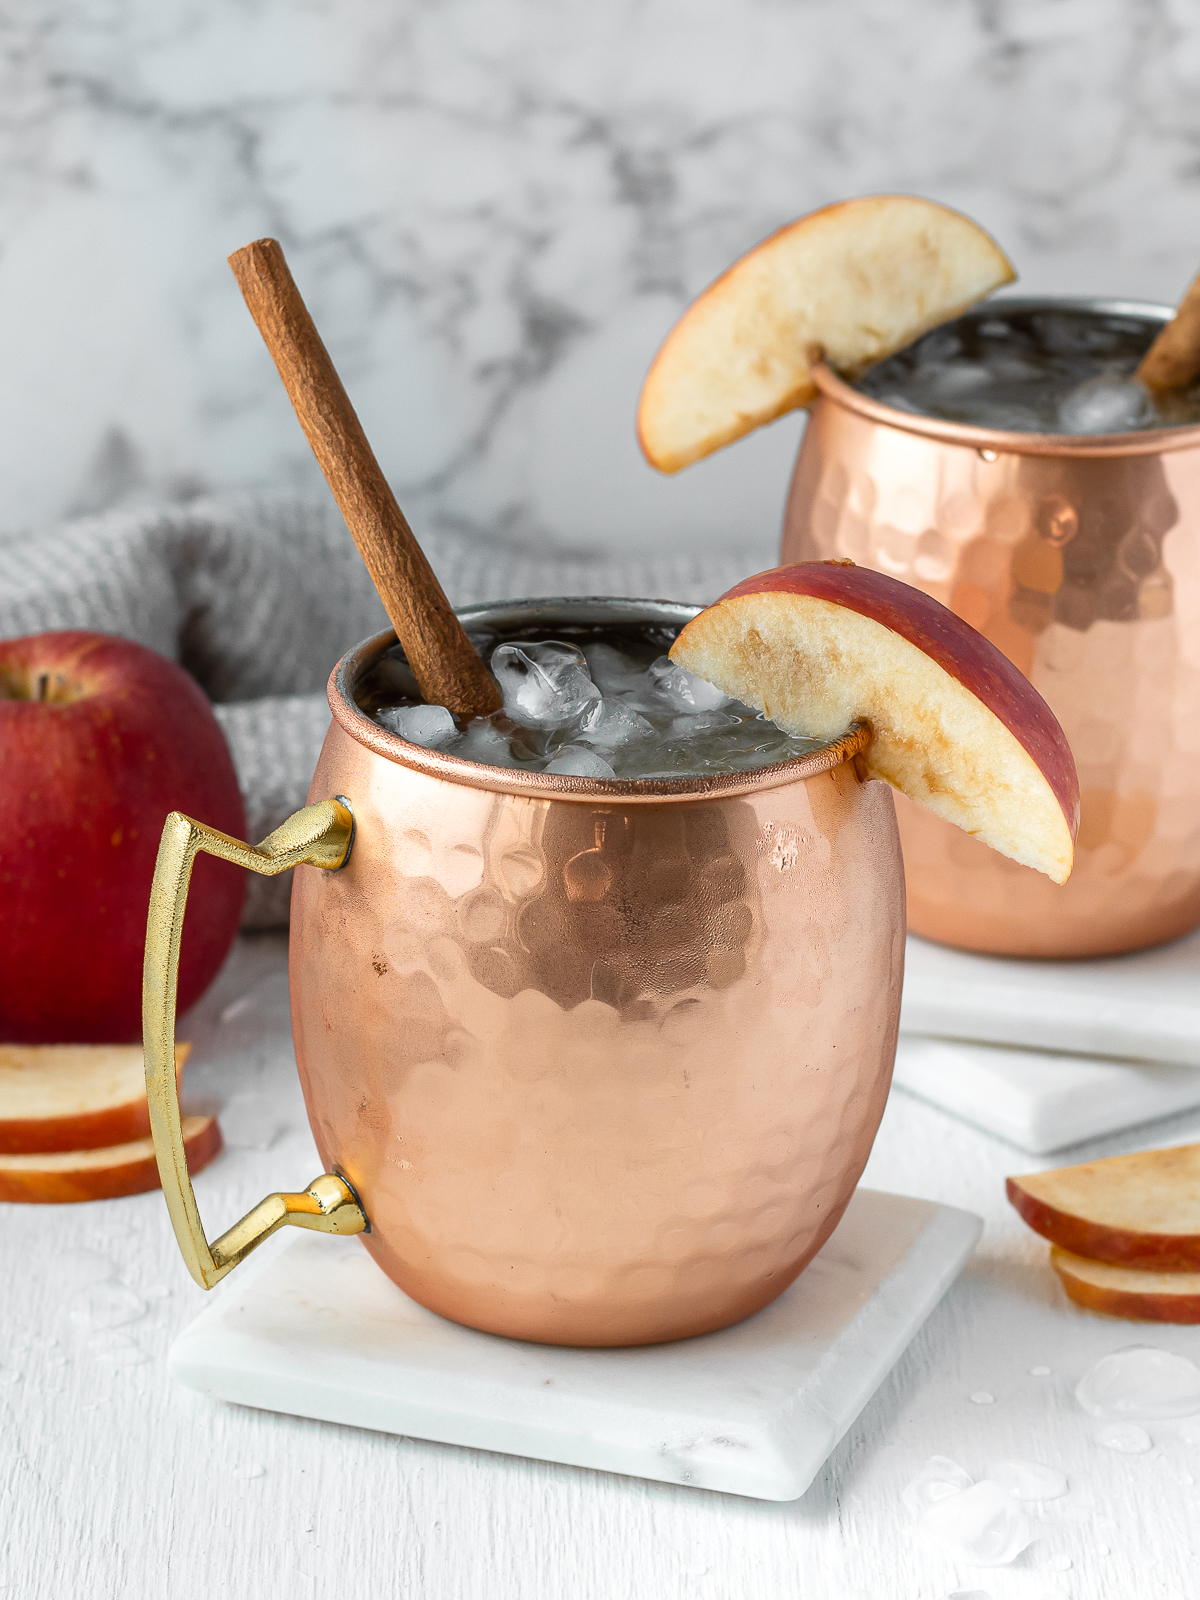 Two Apple Cider Mule Mocktails garnished with a cinnamon stick and slice of apple. More apples in the background.